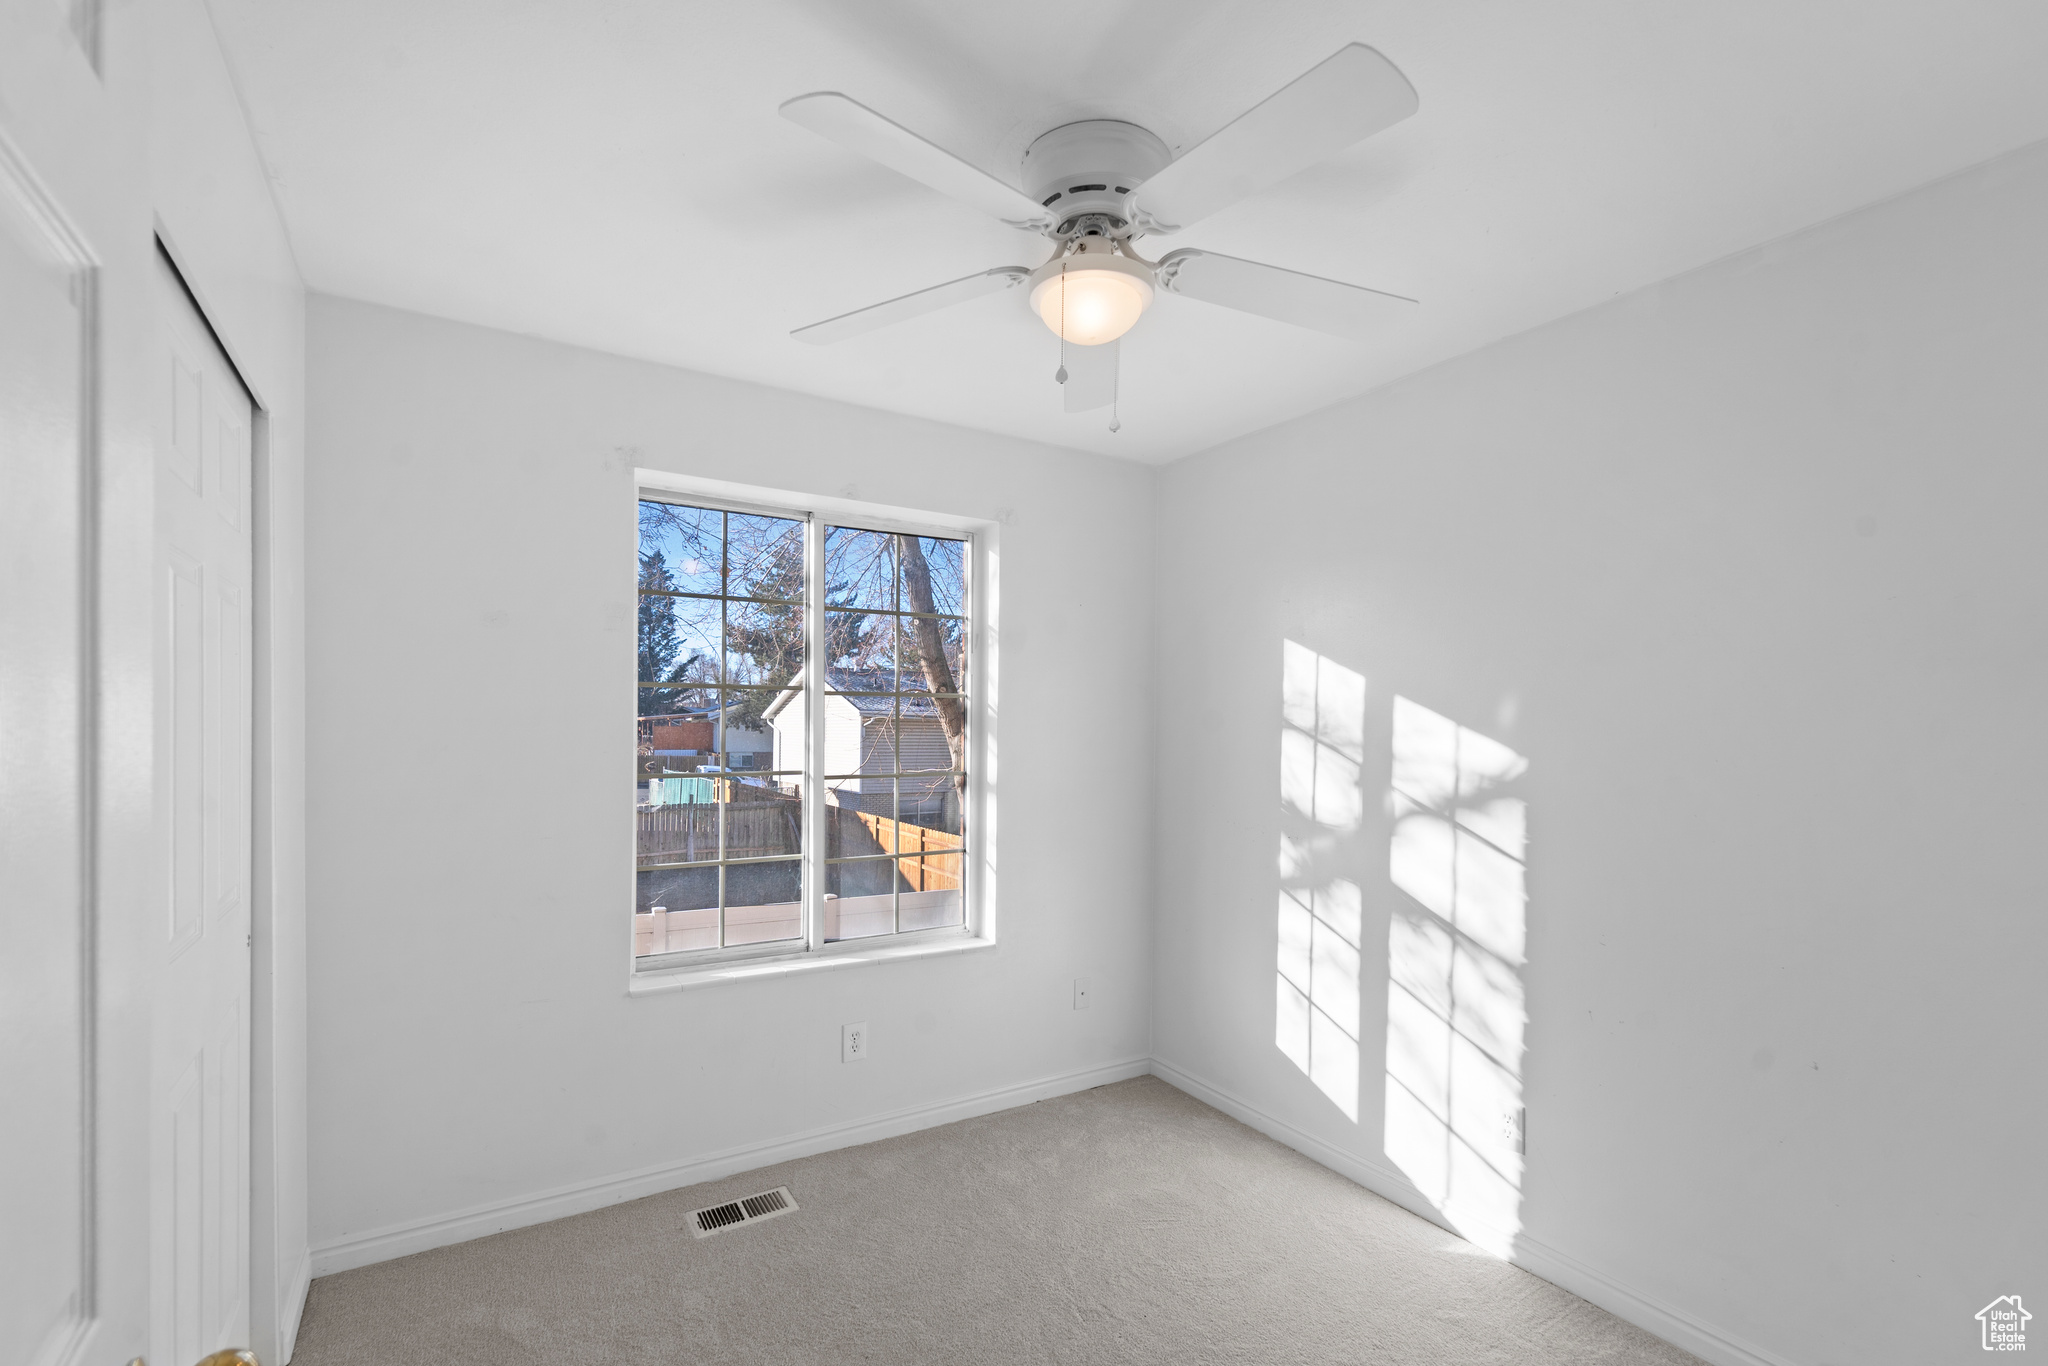 Second room featuring ceiling fan and light carpet